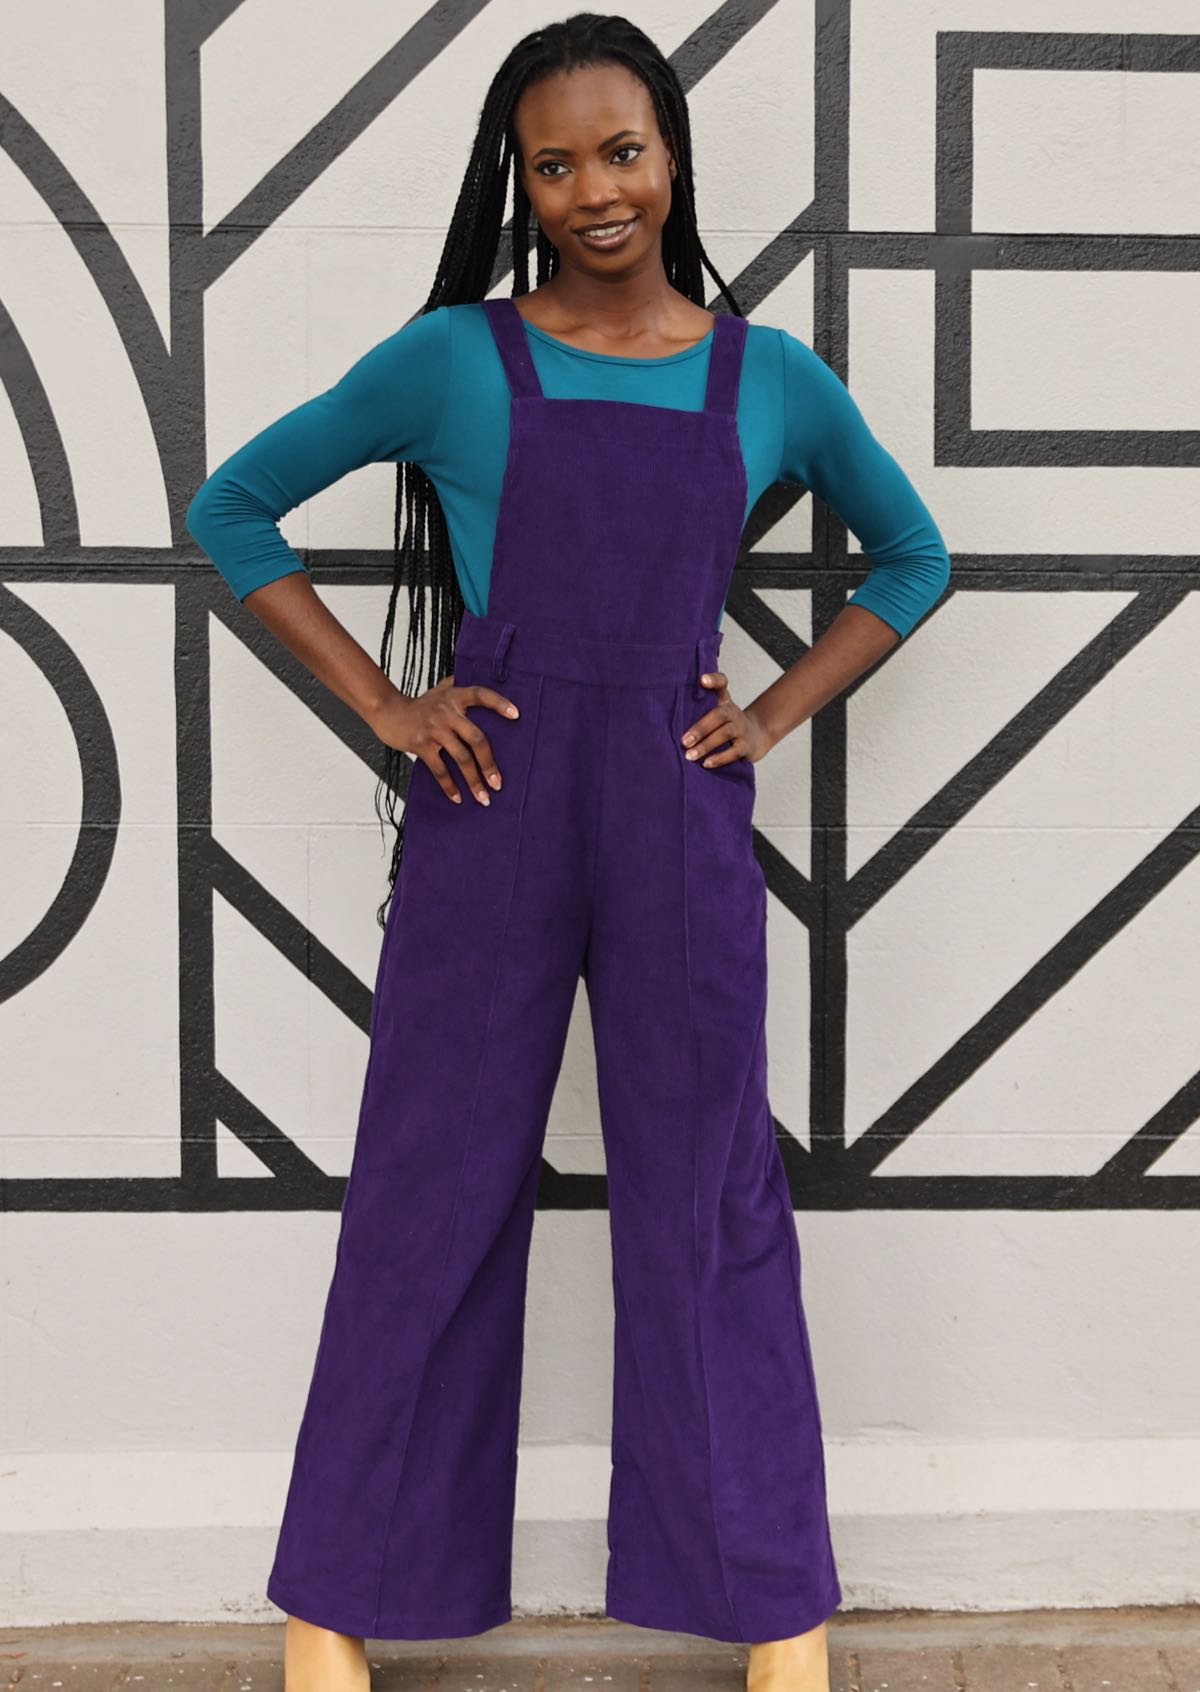 model wearing purple cotton corduroy overalls over teal long sleeve rayon top